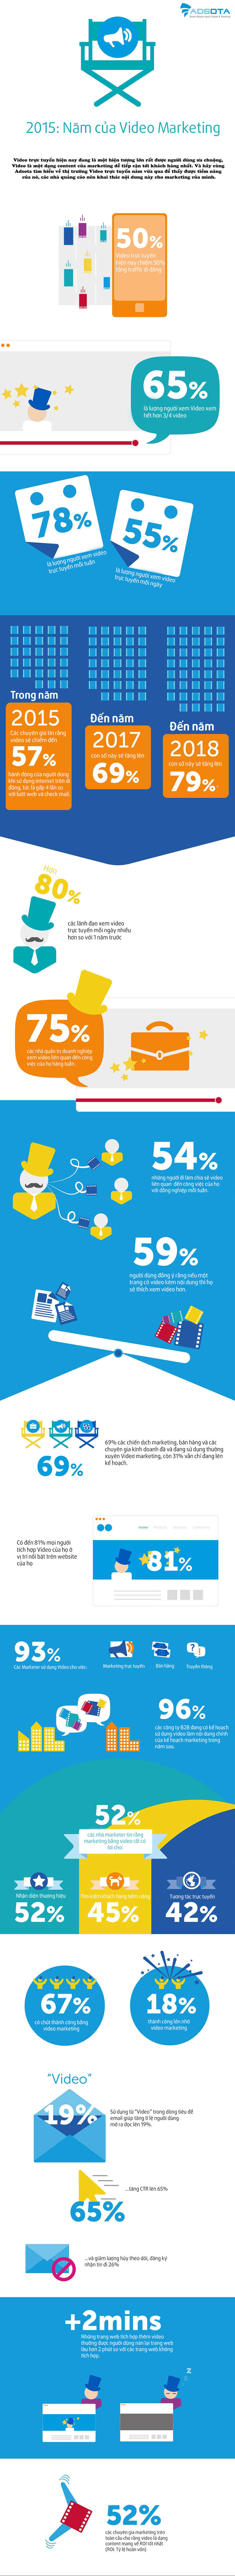 infographic-video-marketing-trong-nam-2015